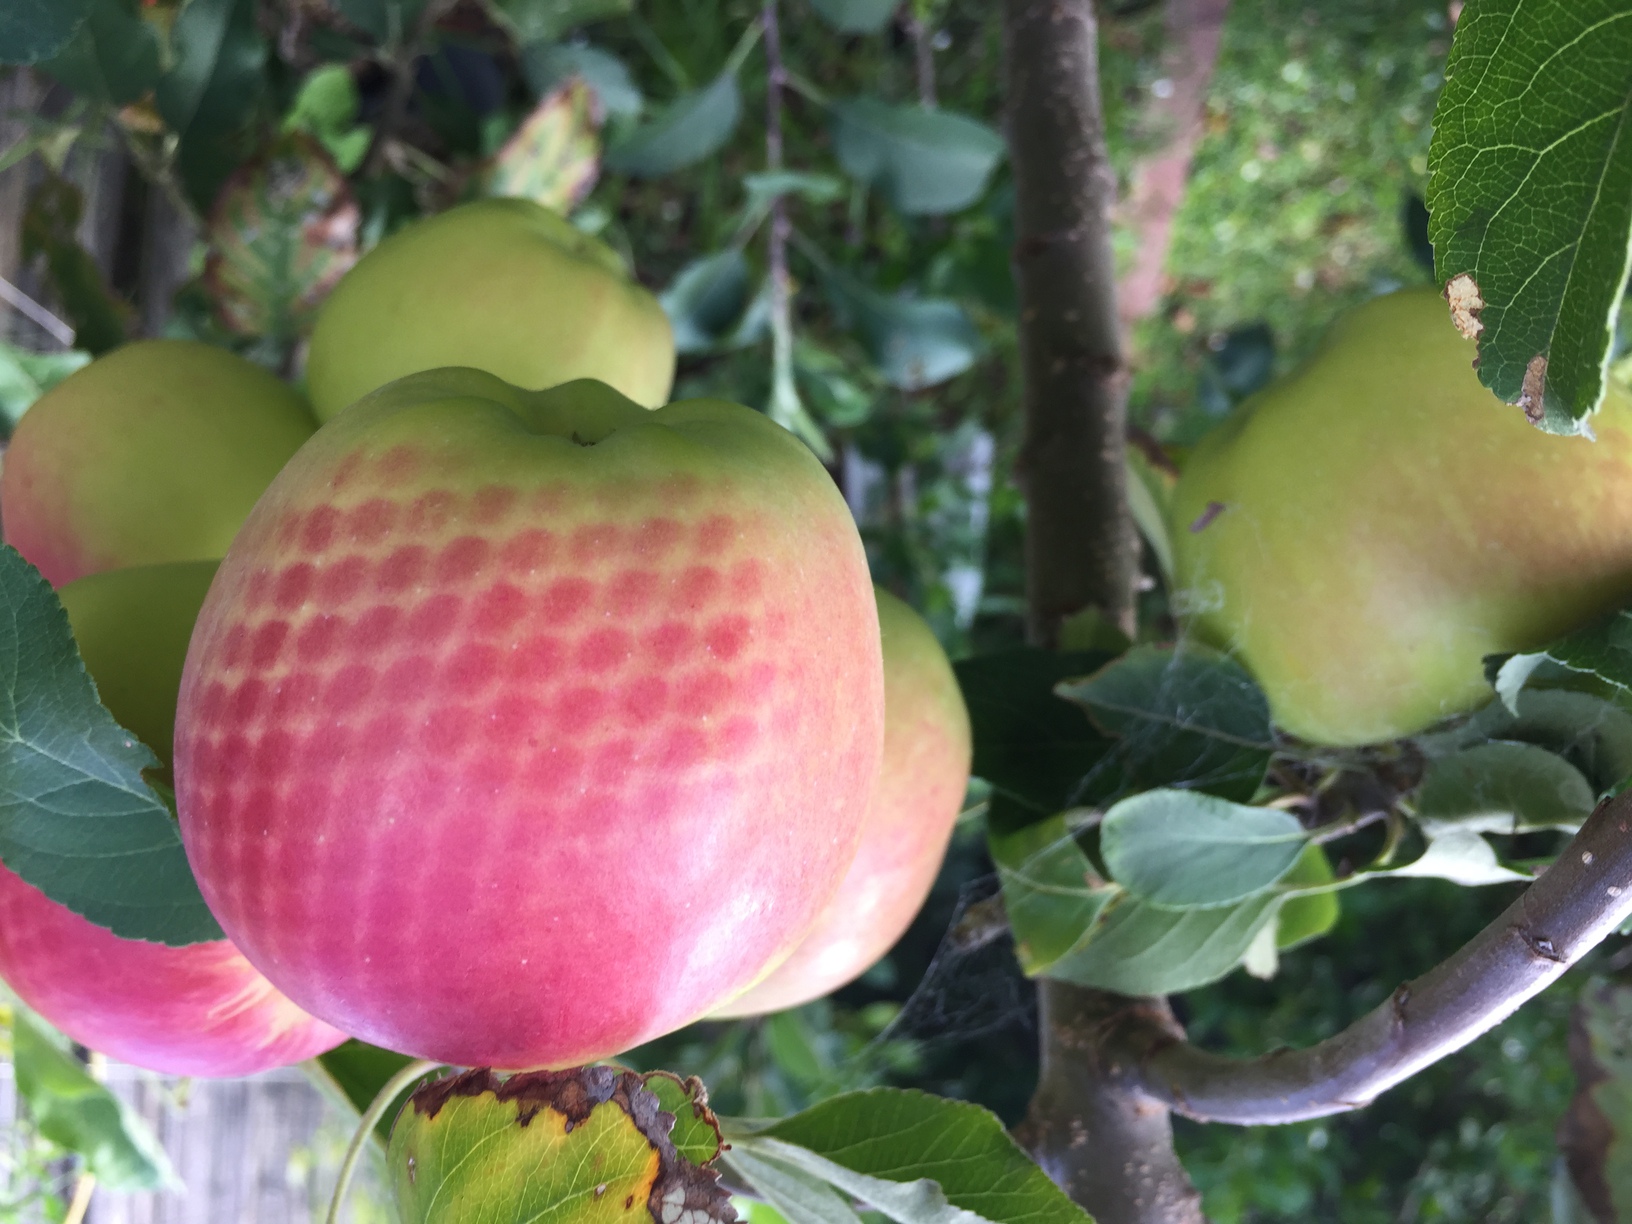 The interesting side-effect of providing patterned shade over a ripening apple